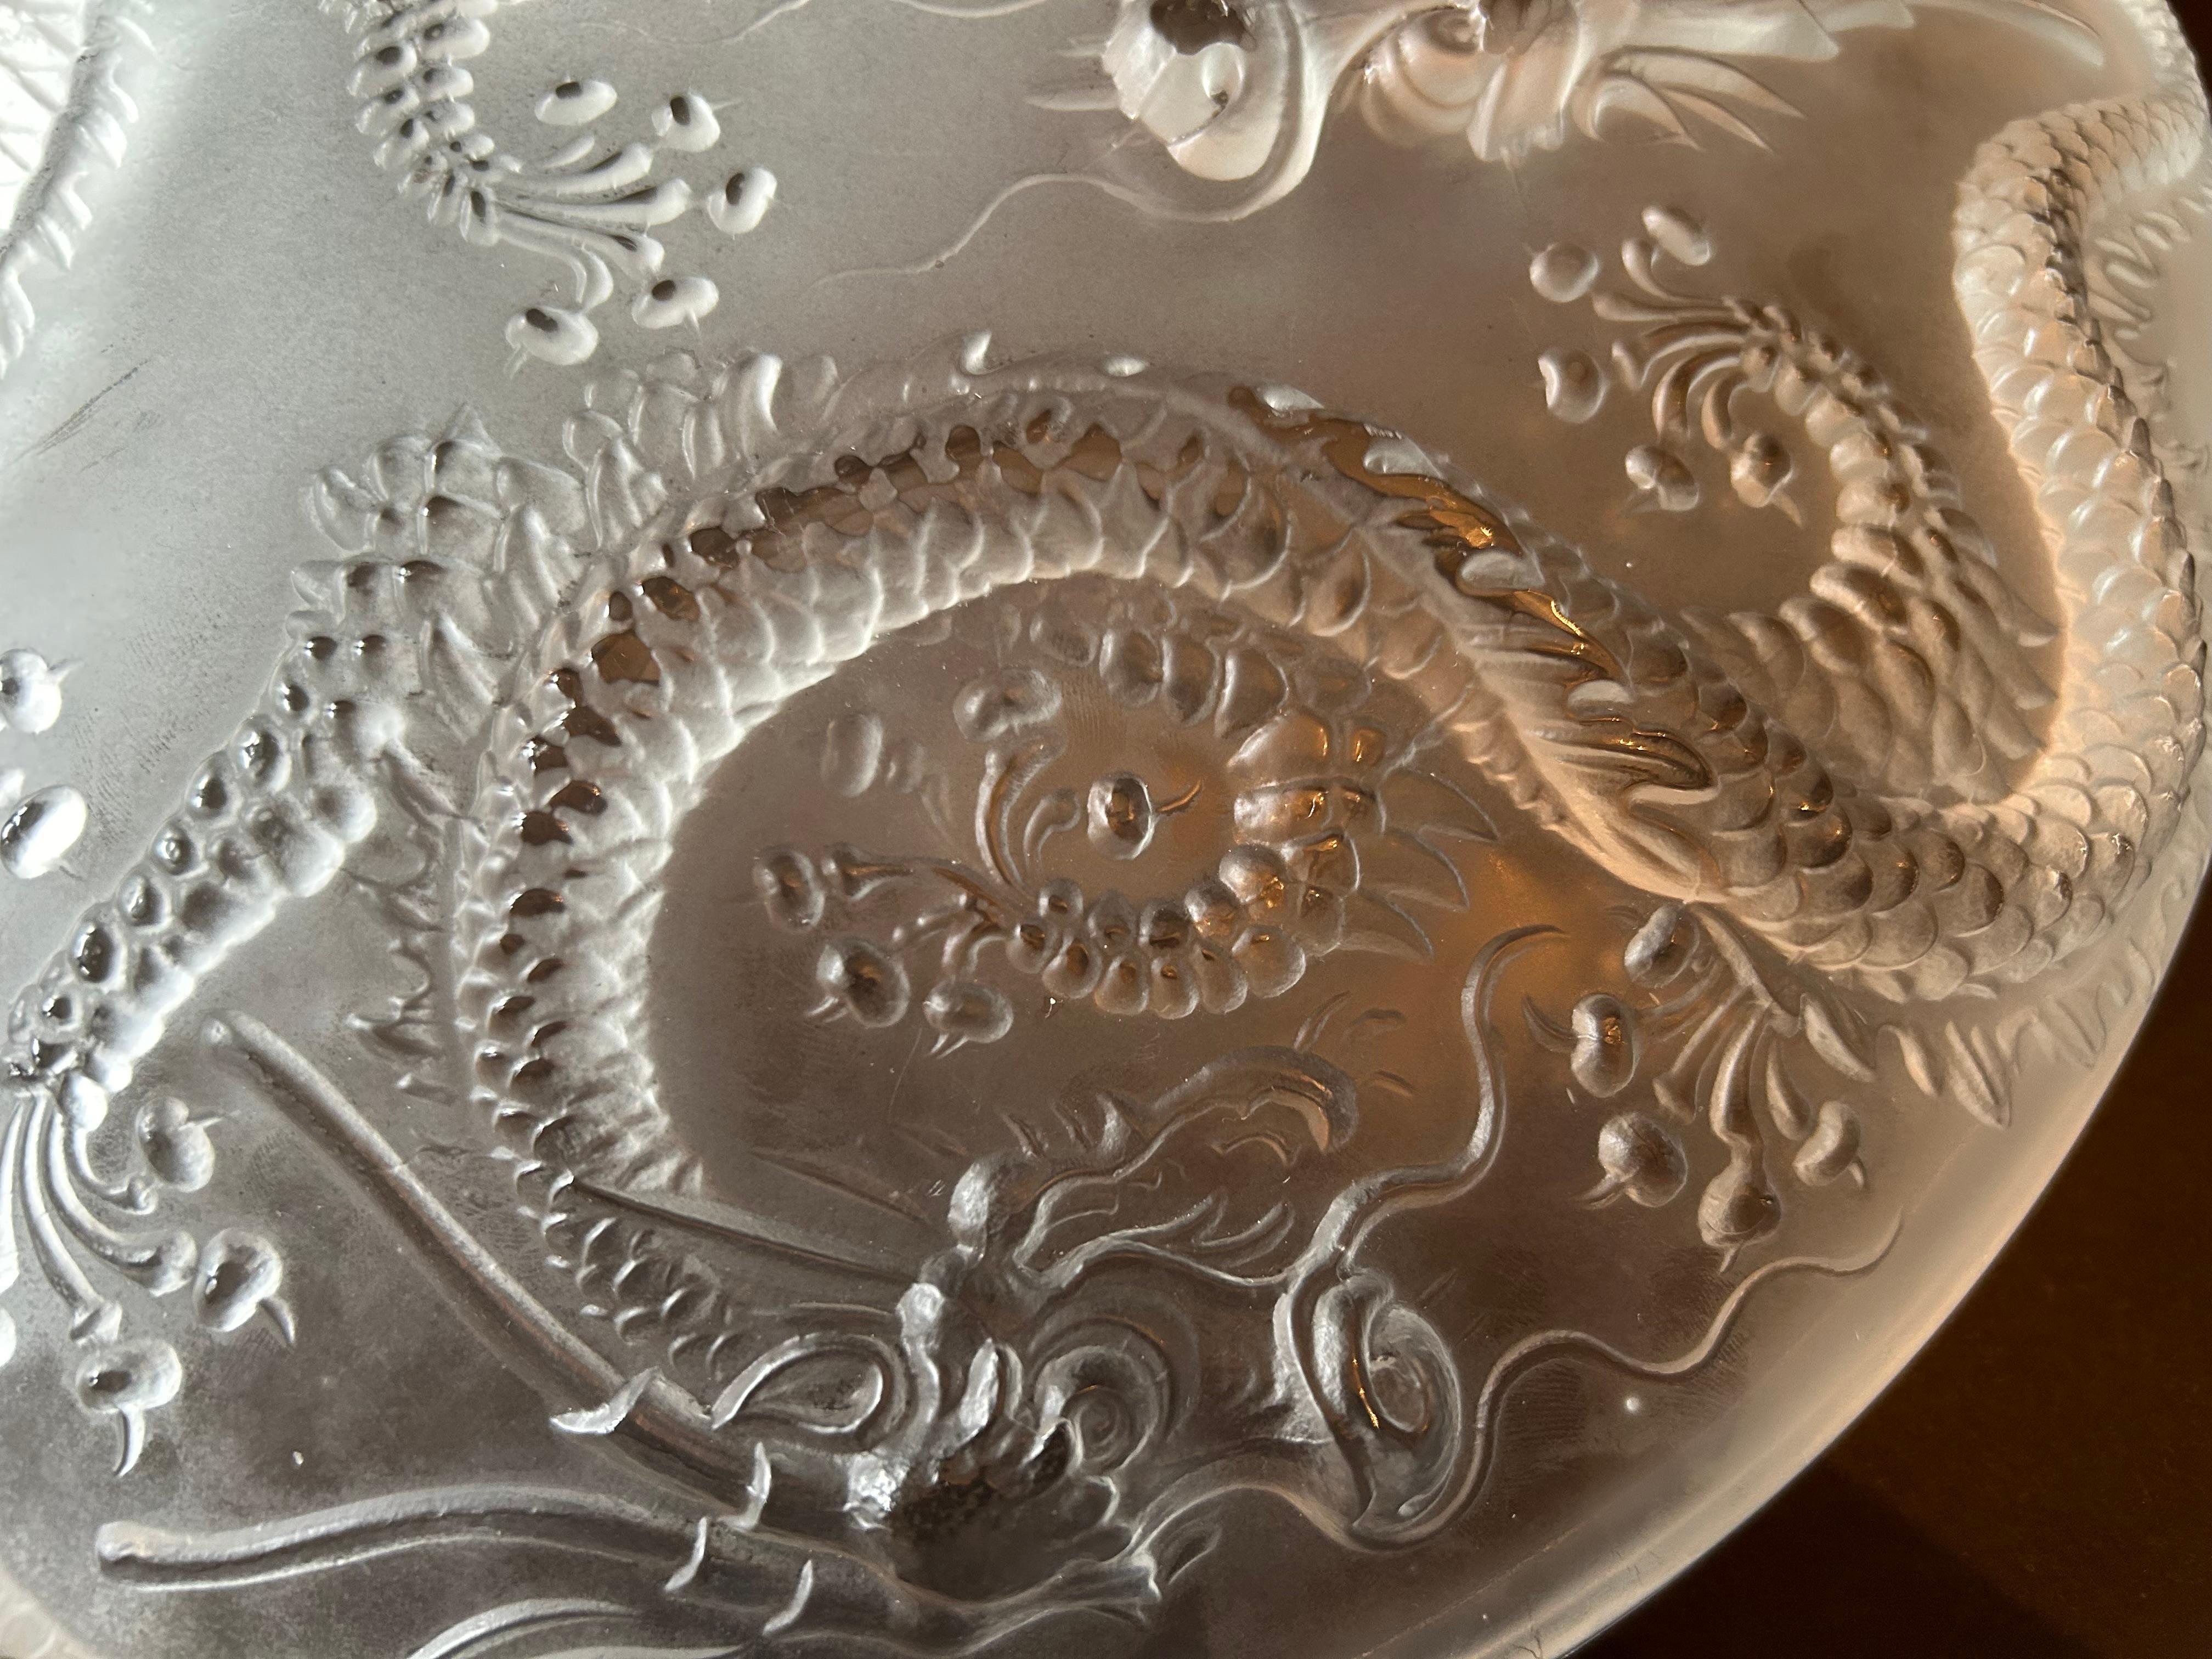 Art Glass Large Frosted Glass Bowl With Dragons by Josef Inwald for Barolac, 1930 For Sale